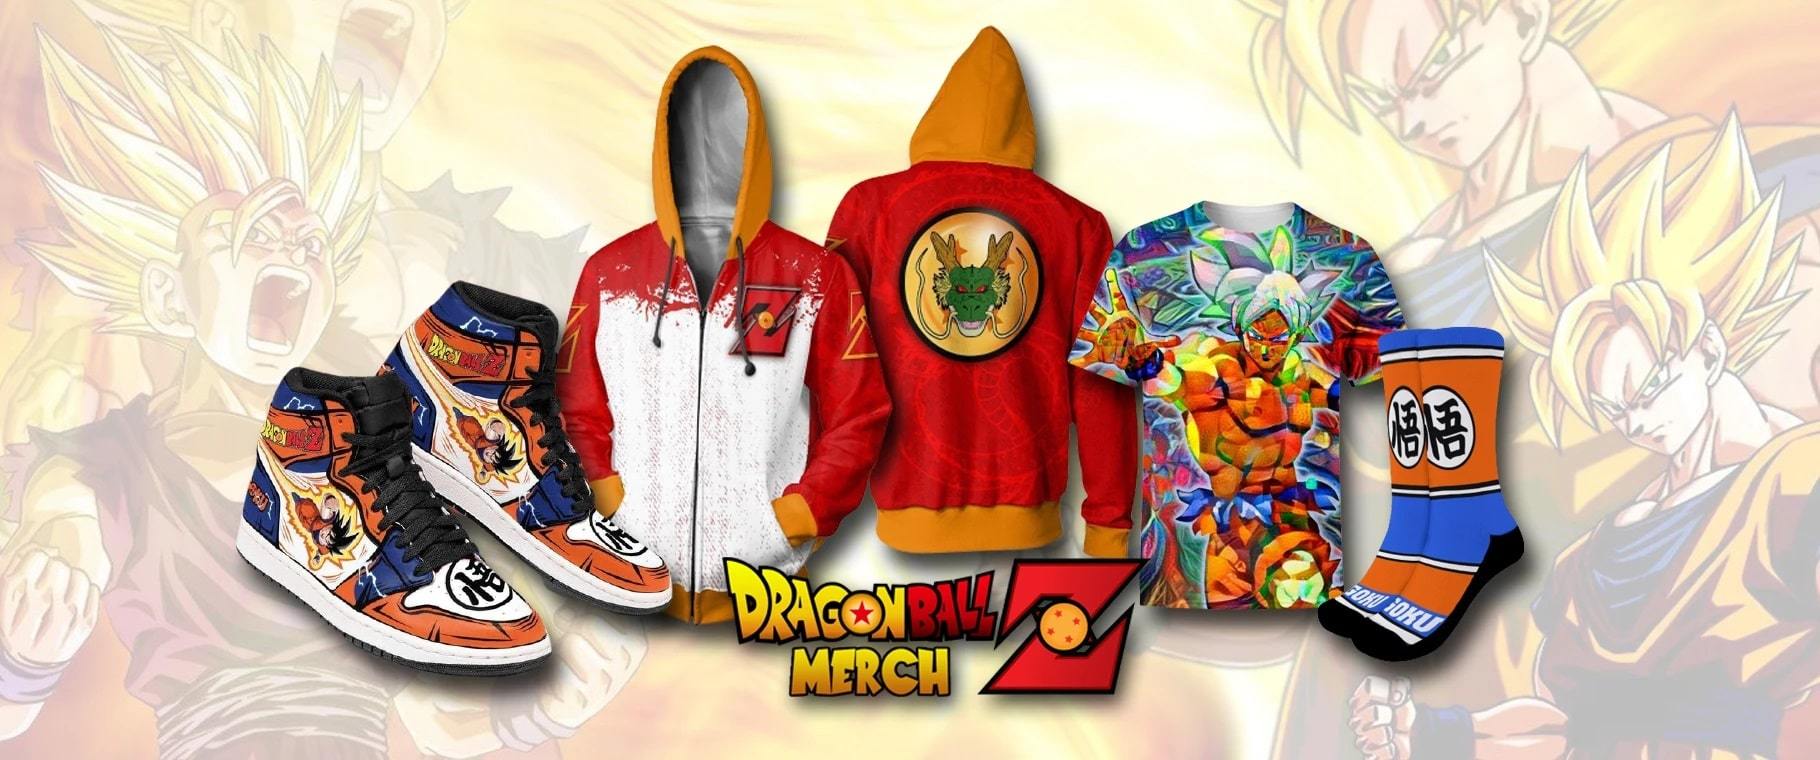 Android 17 Merchandise & More - Dragon Ball Z Store